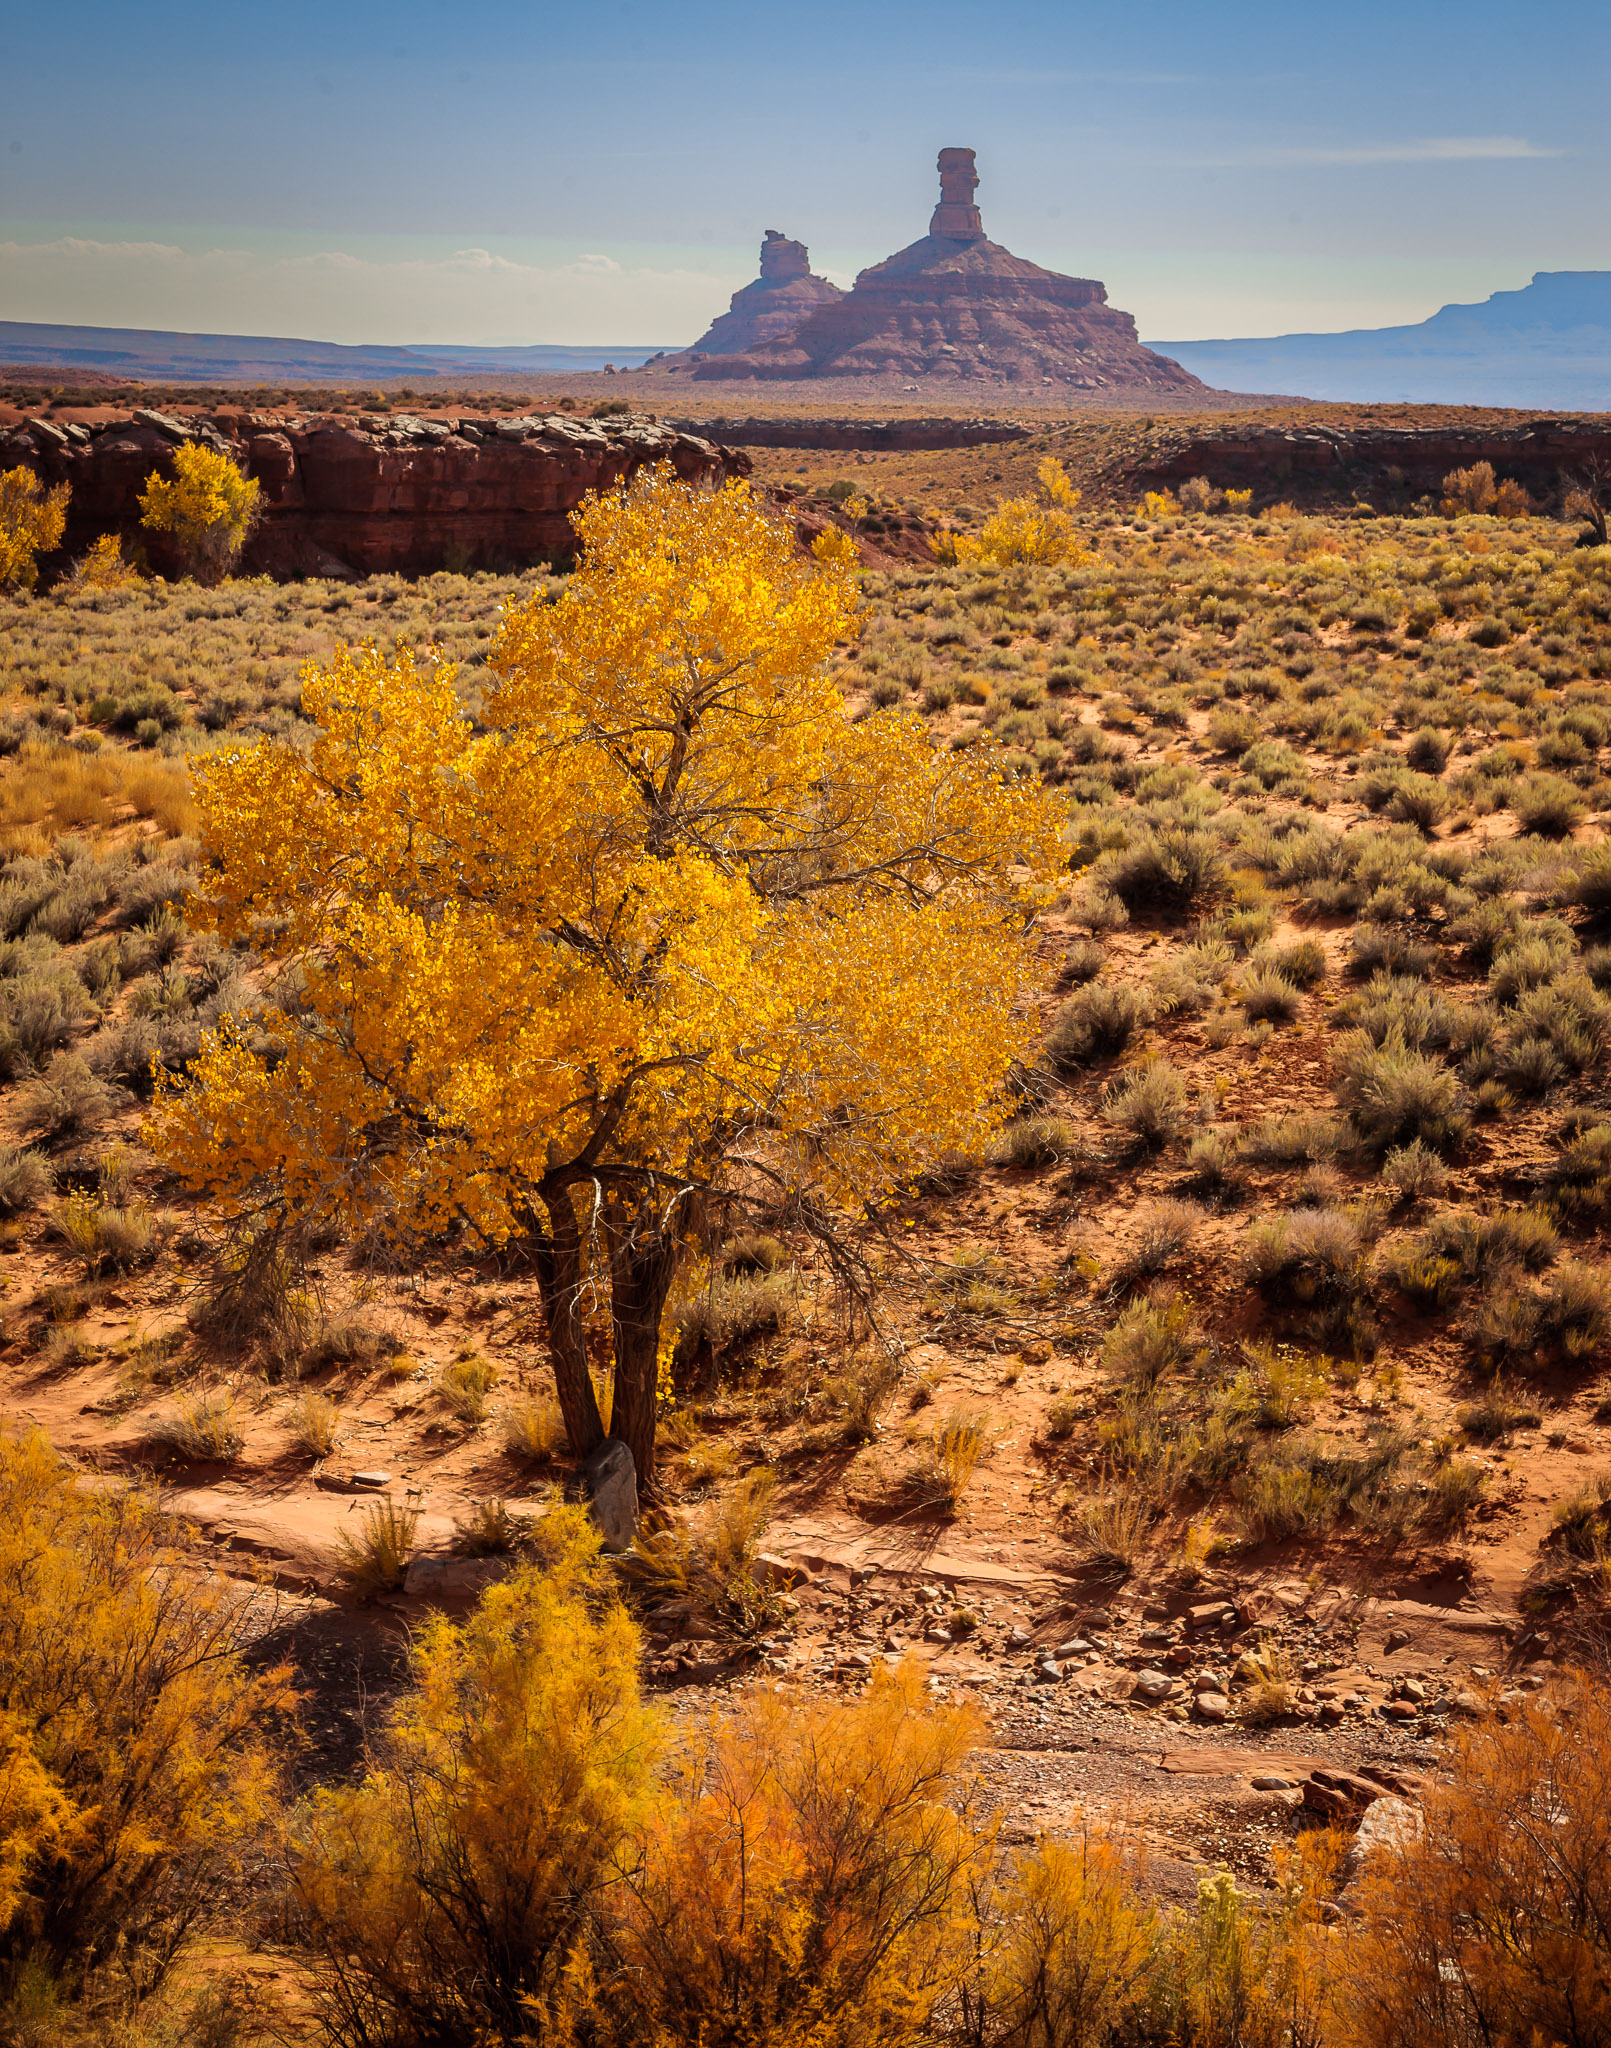 Cottonwoods, Pyramid Peak in distance, Valley of the Gods